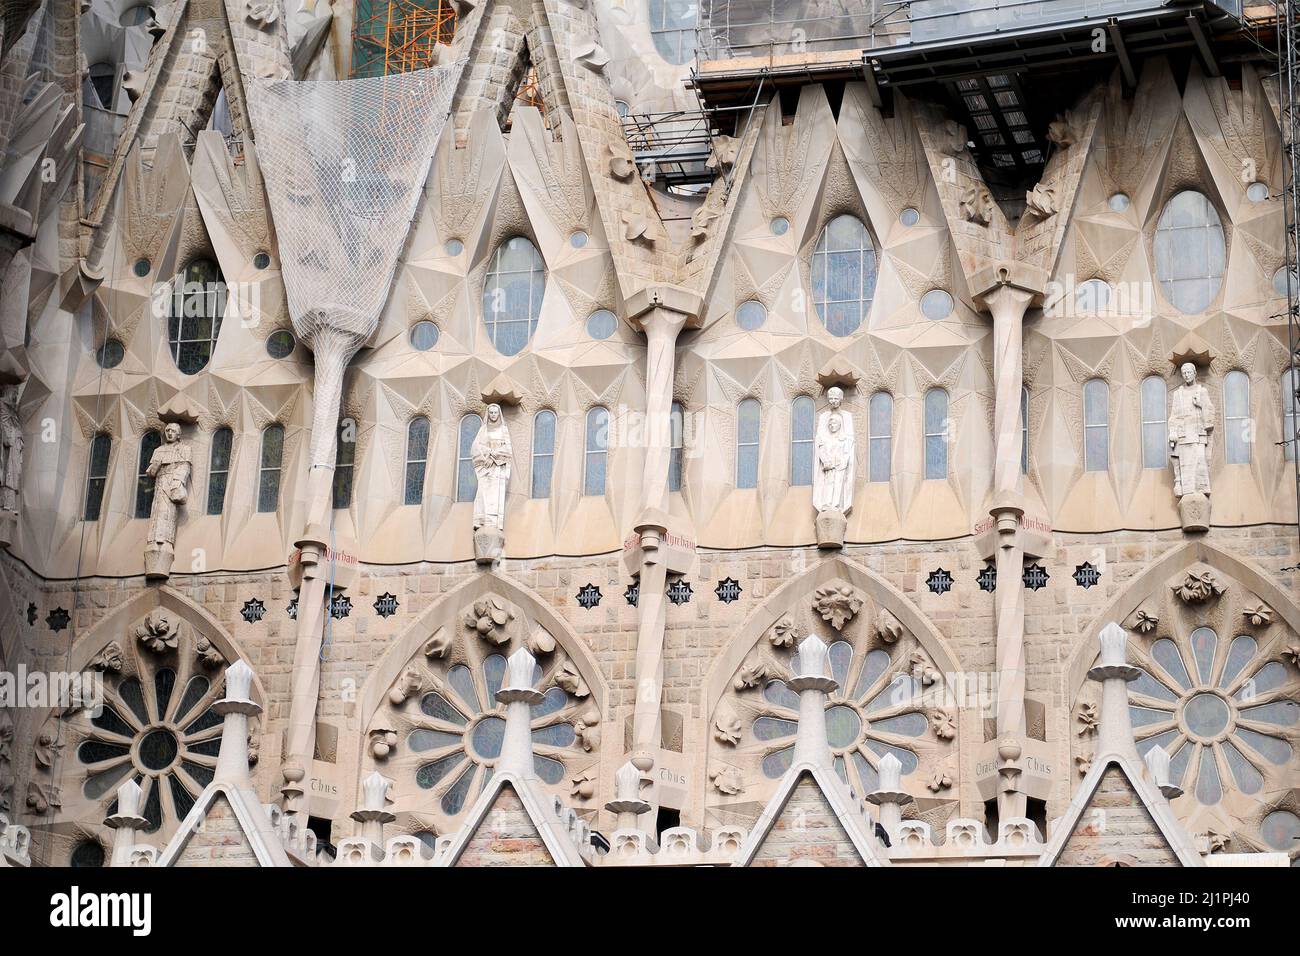 The Holy Family Cathedral of Barcelona (Credit Image: © Julen Pascual Gonzalez) Stock Photo